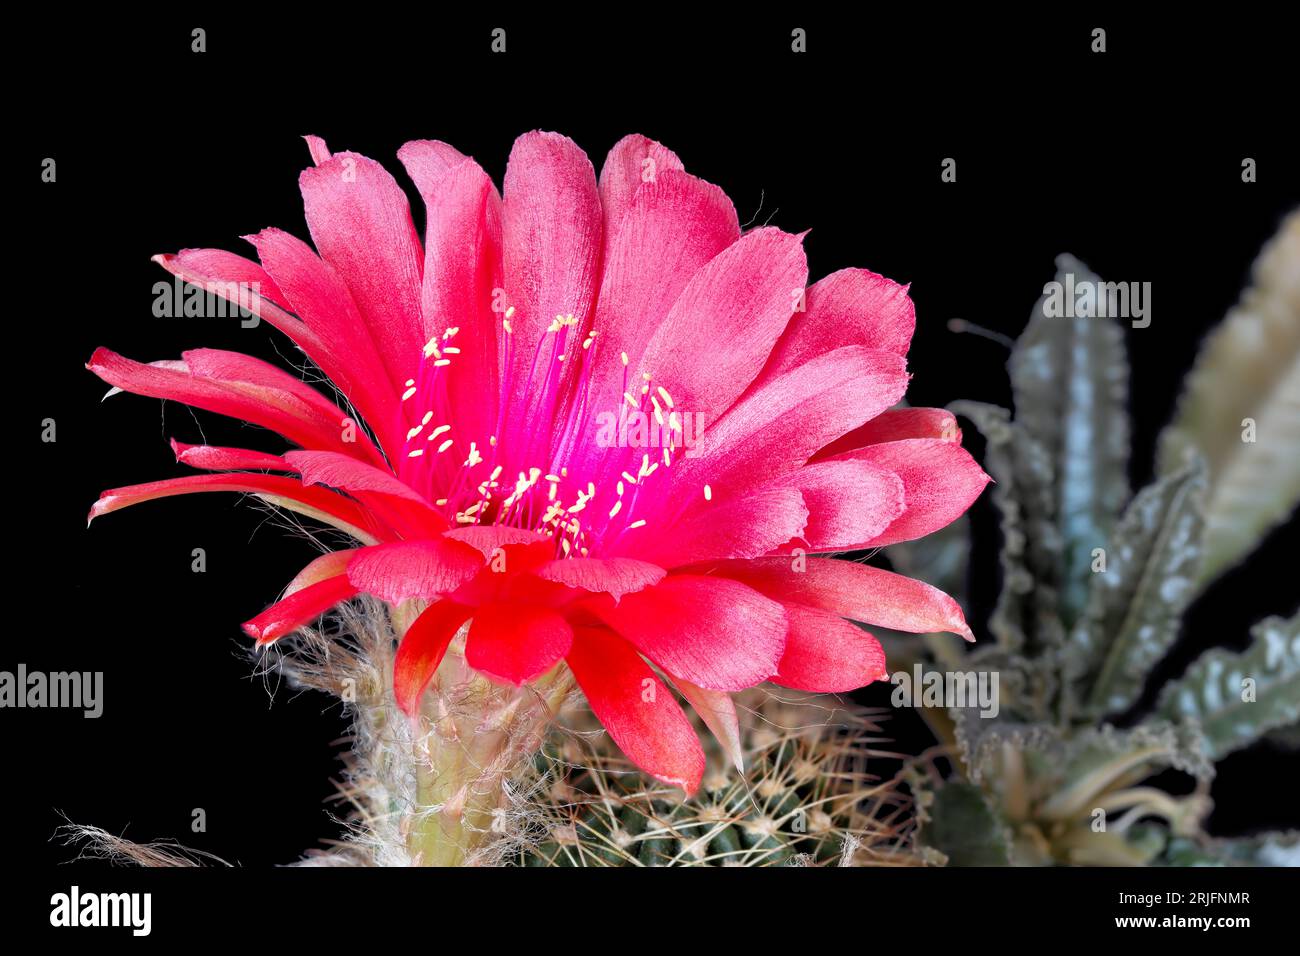 Blooming cactus on a black background, close up Stock Photo